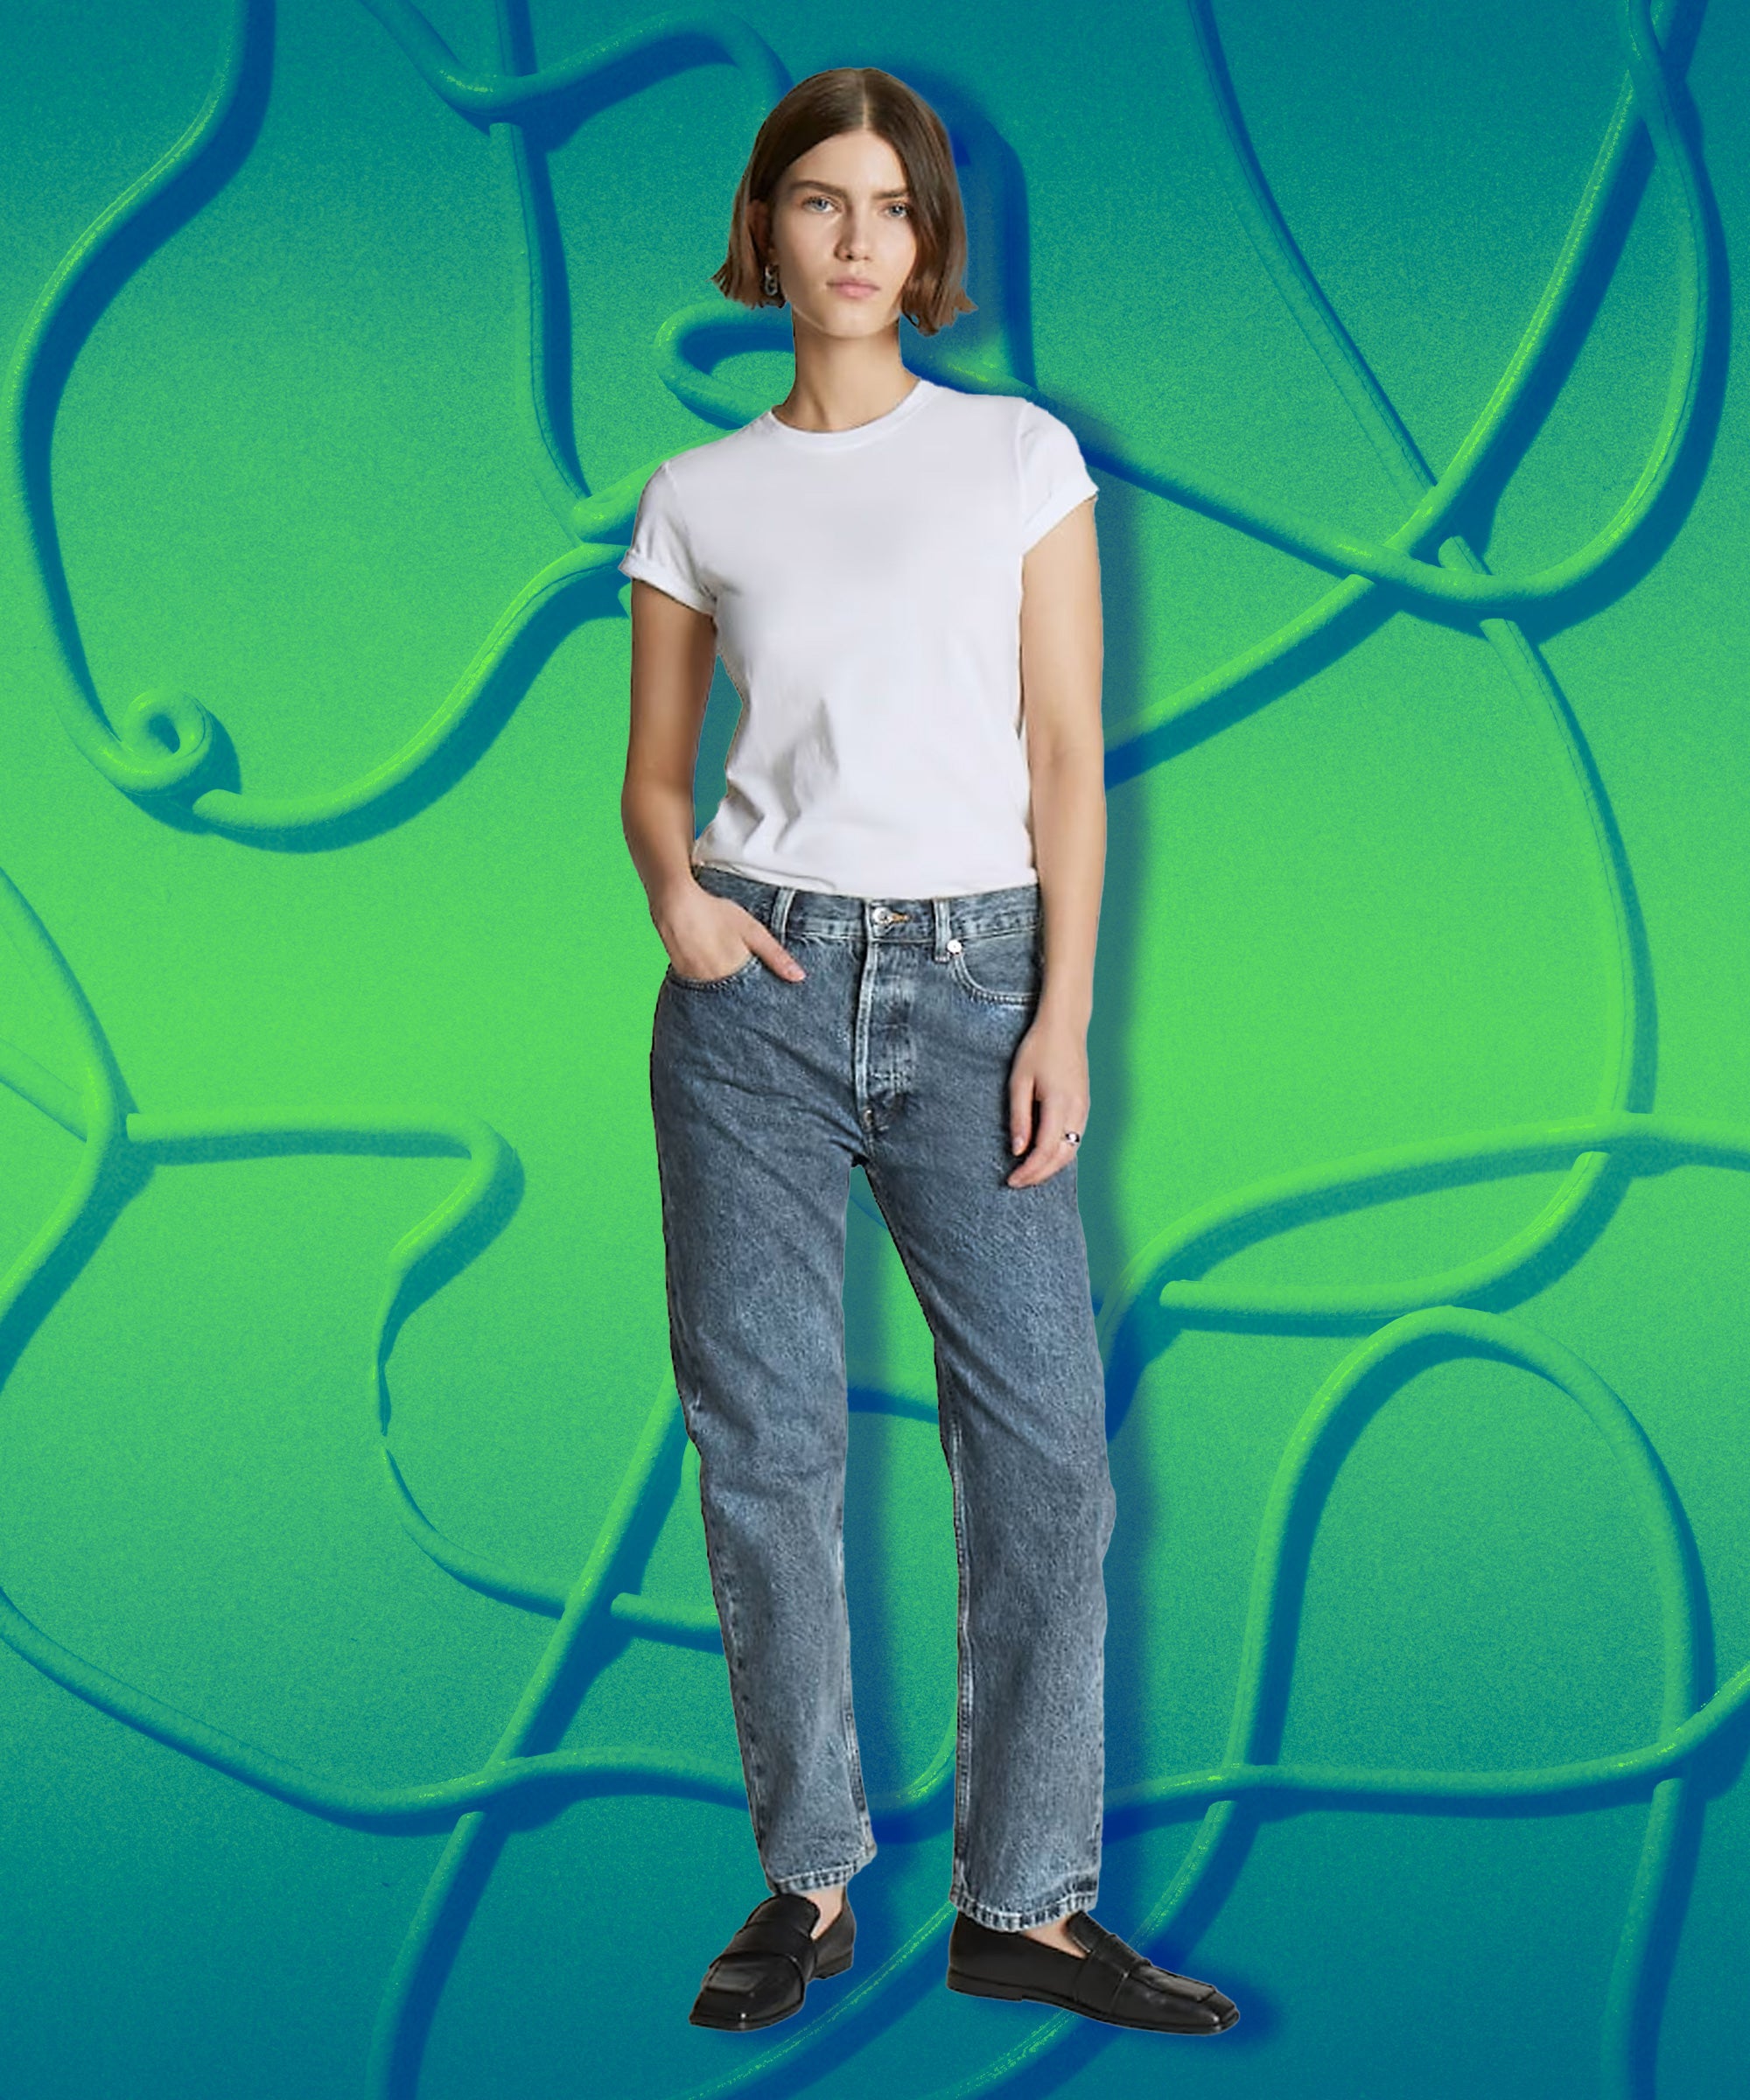 Found some very comfortable pairs of jeans Thoughts on baggy jeans